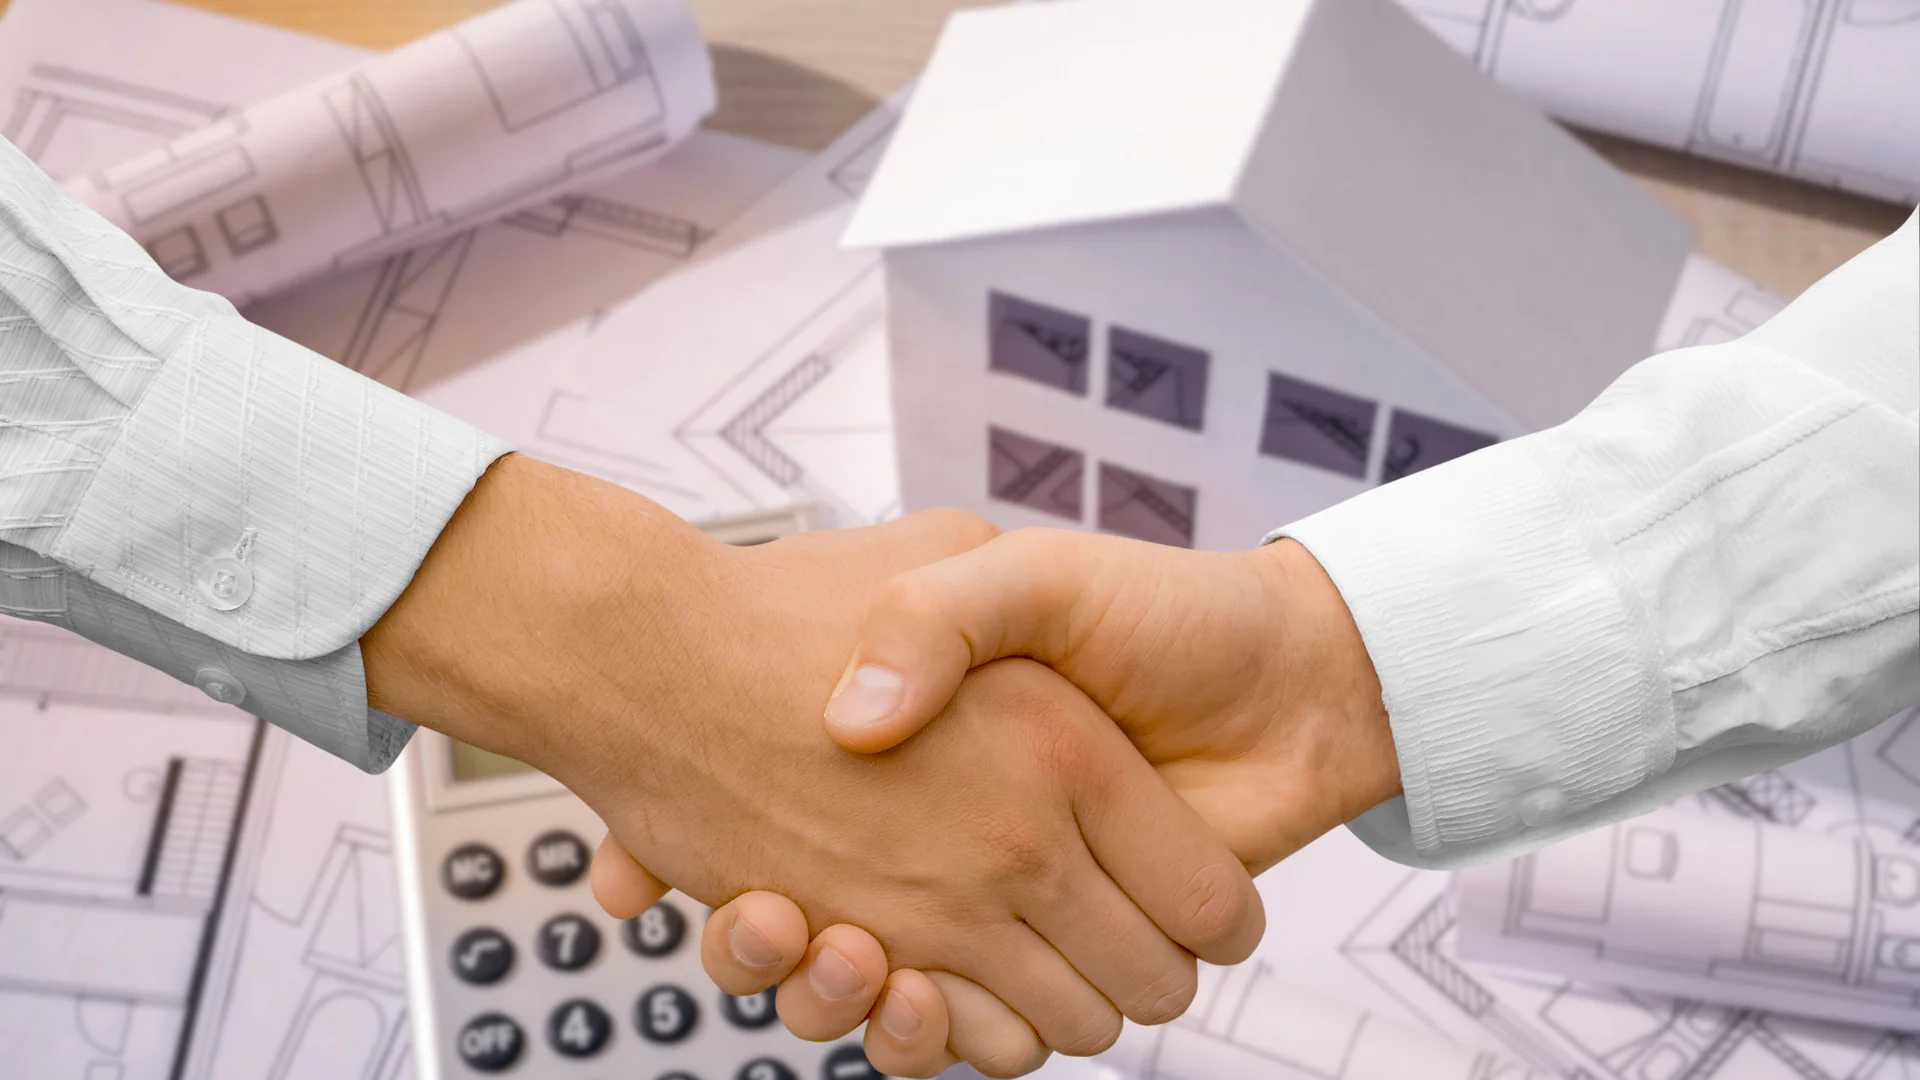 Header image depicting the professional role of mortgage brokers, featuring symbols like a house, calculator, and a handshake, symbolising expertise in mortgage guidance.